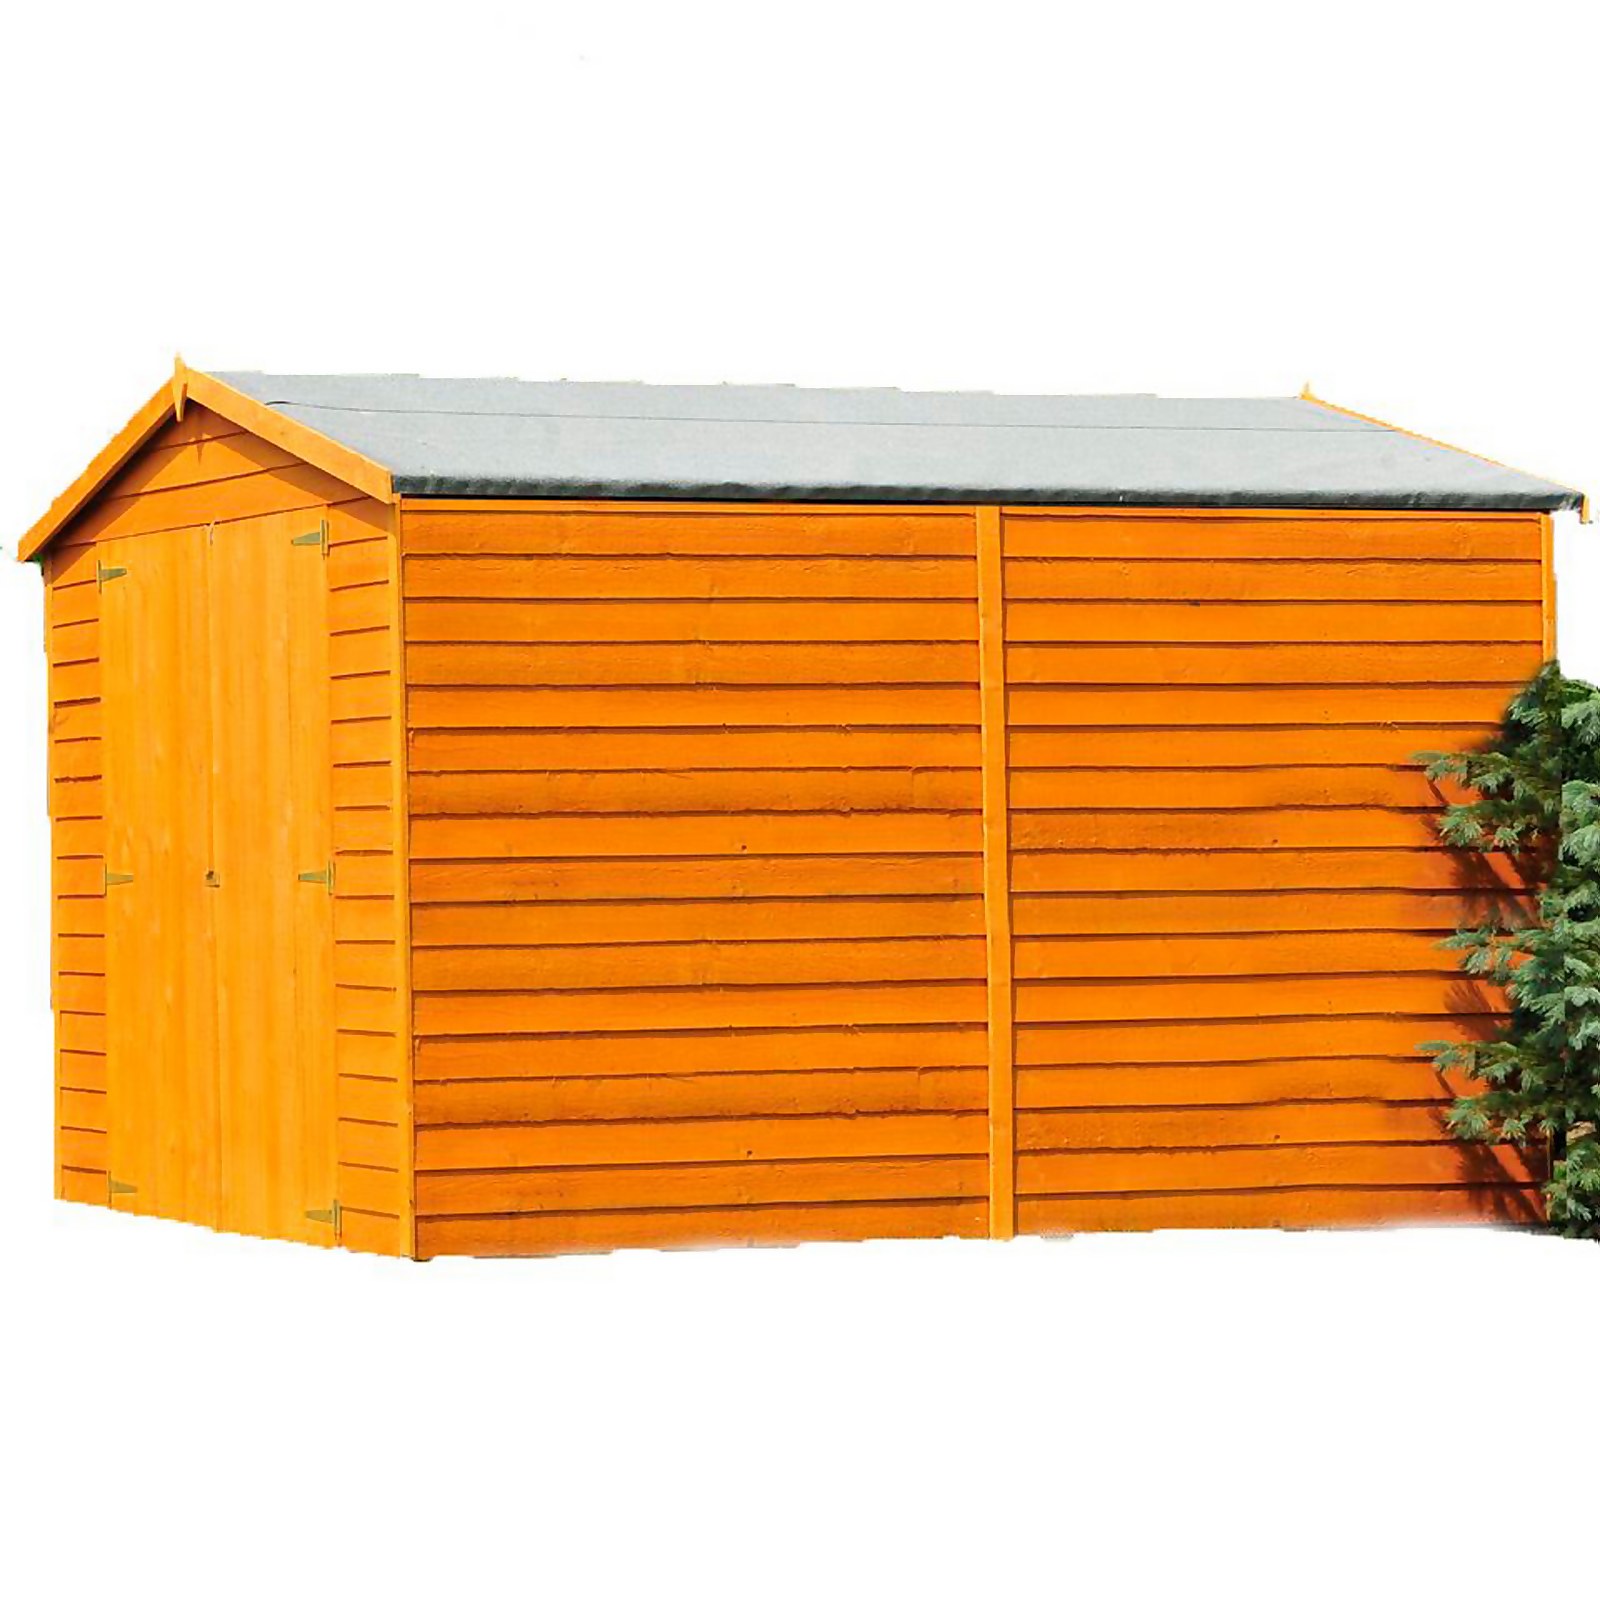 Shire 10 x 10ft Double Door Overlap Garden Shed with No Windows